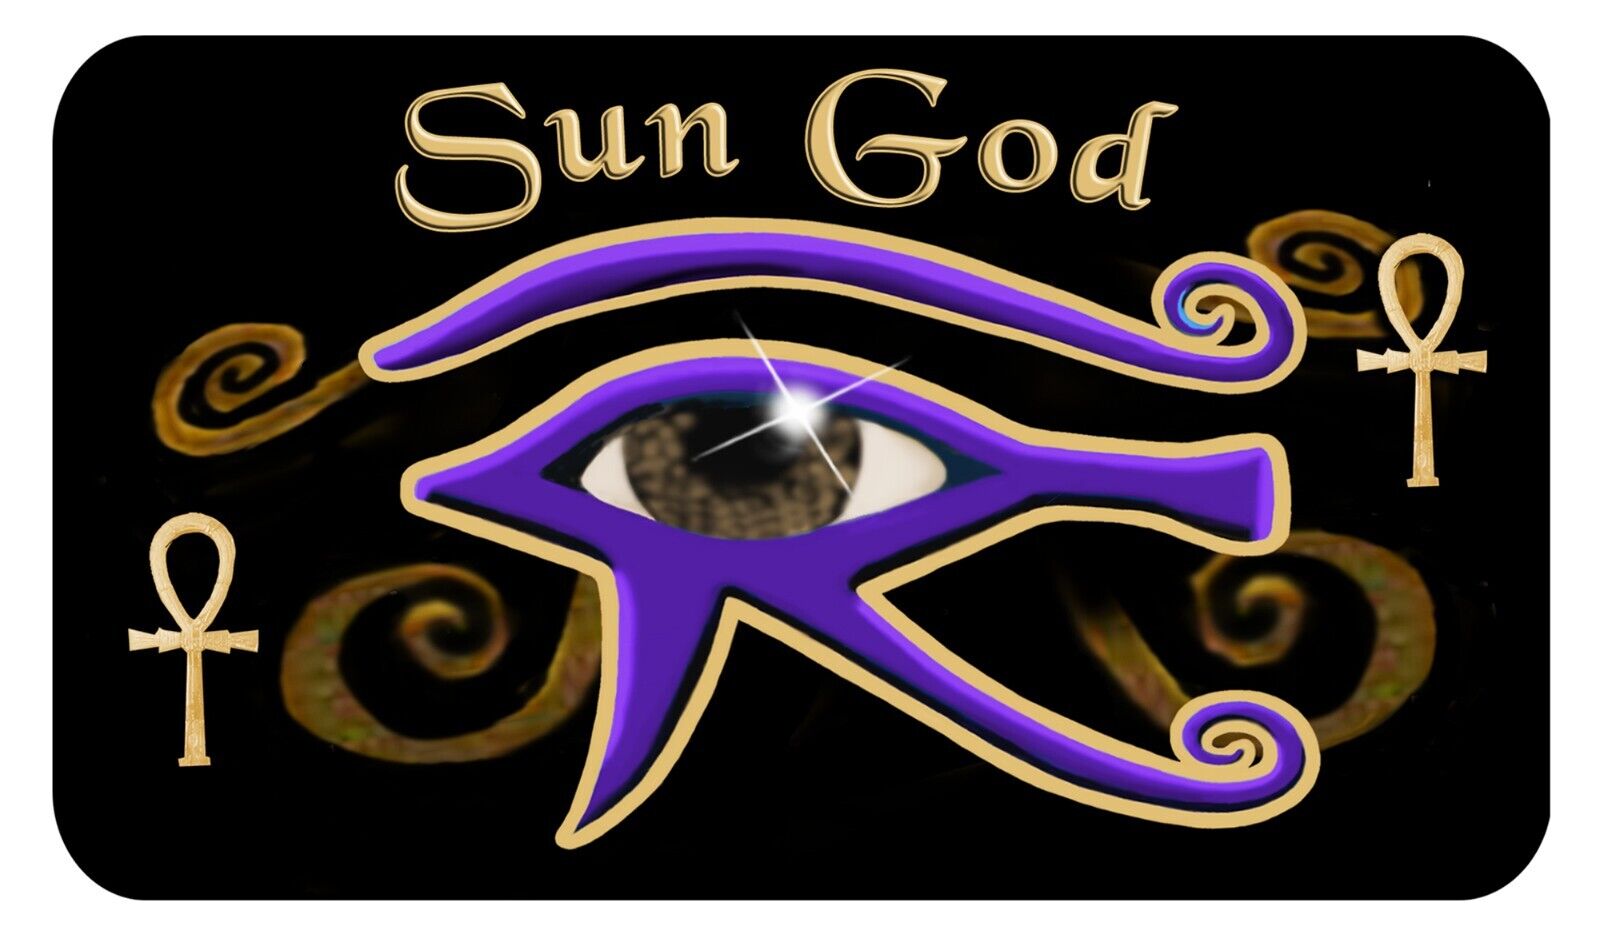 2-Egyptian Eye Of Ra Decals Bumper Stickers Personalize Name Or Text 3.5\